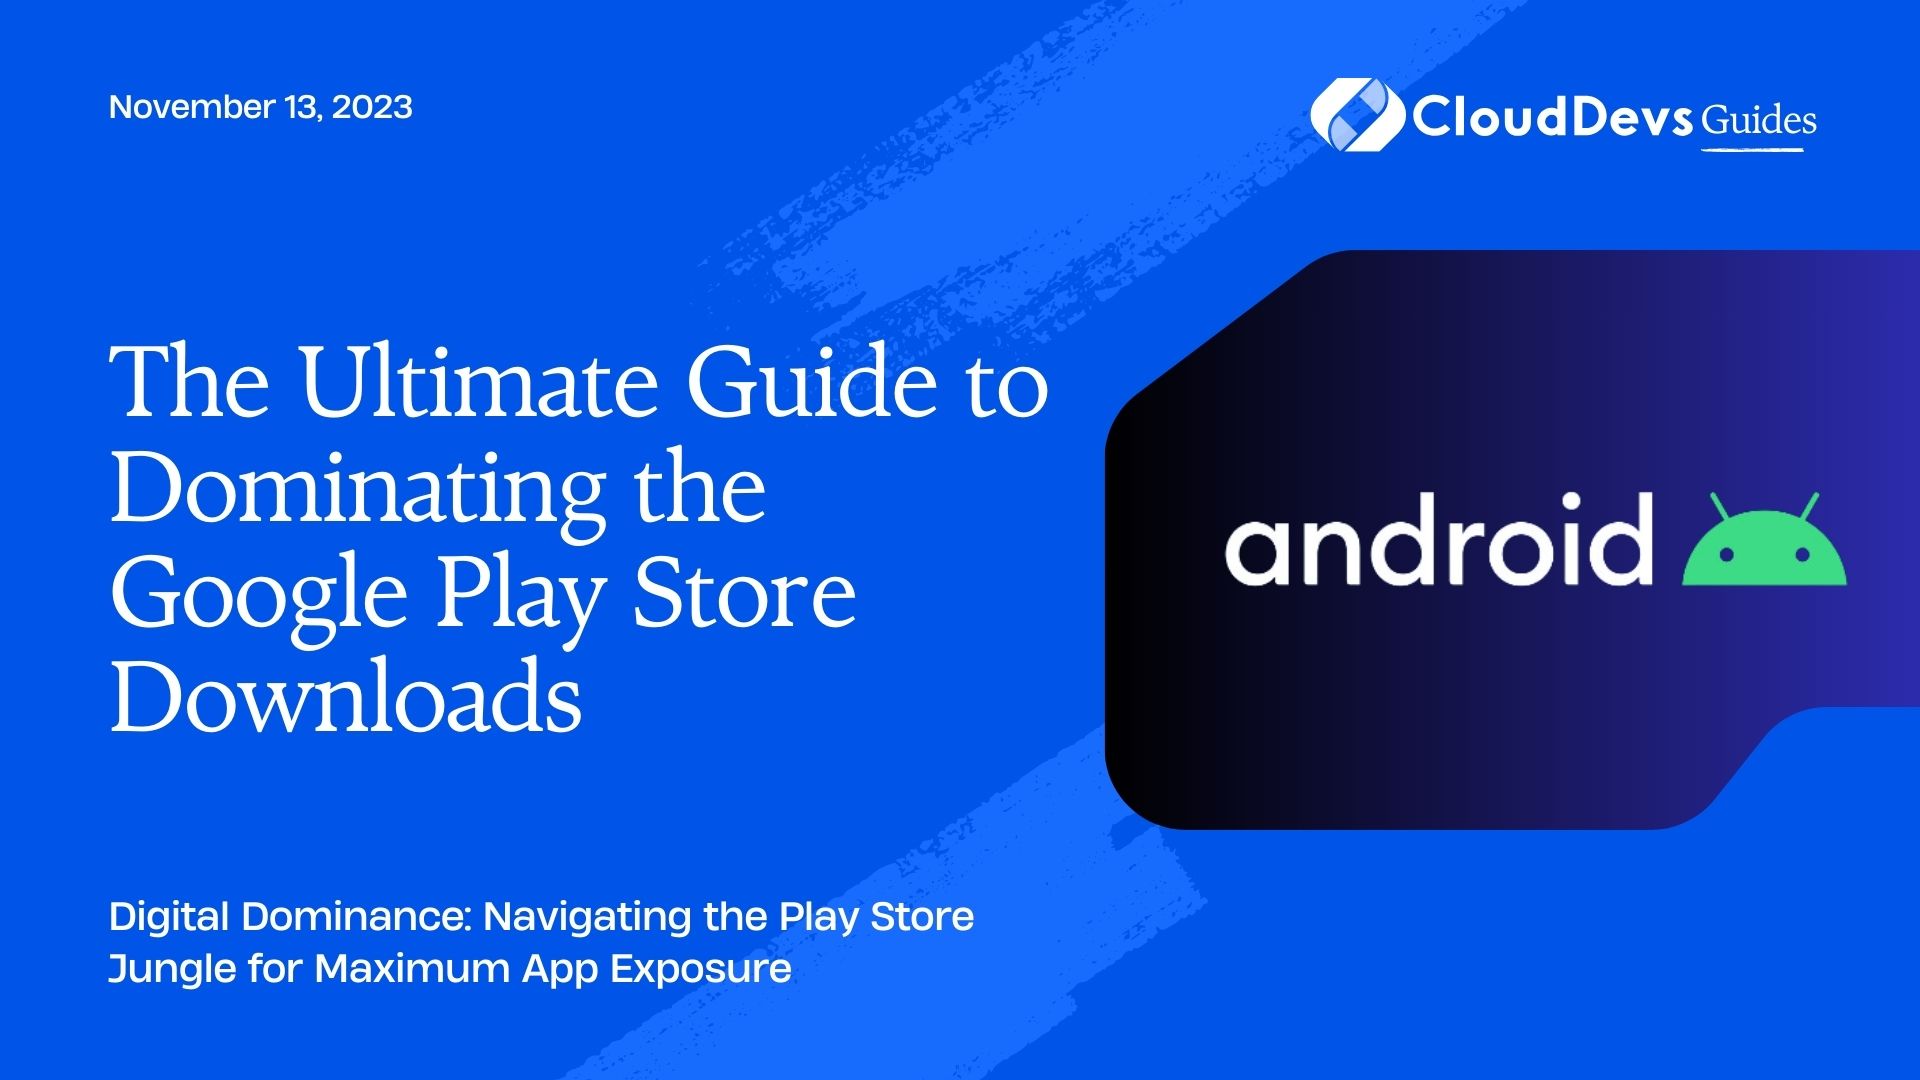 The Ultimate Guide to Dominating the Google Play Store Downloads